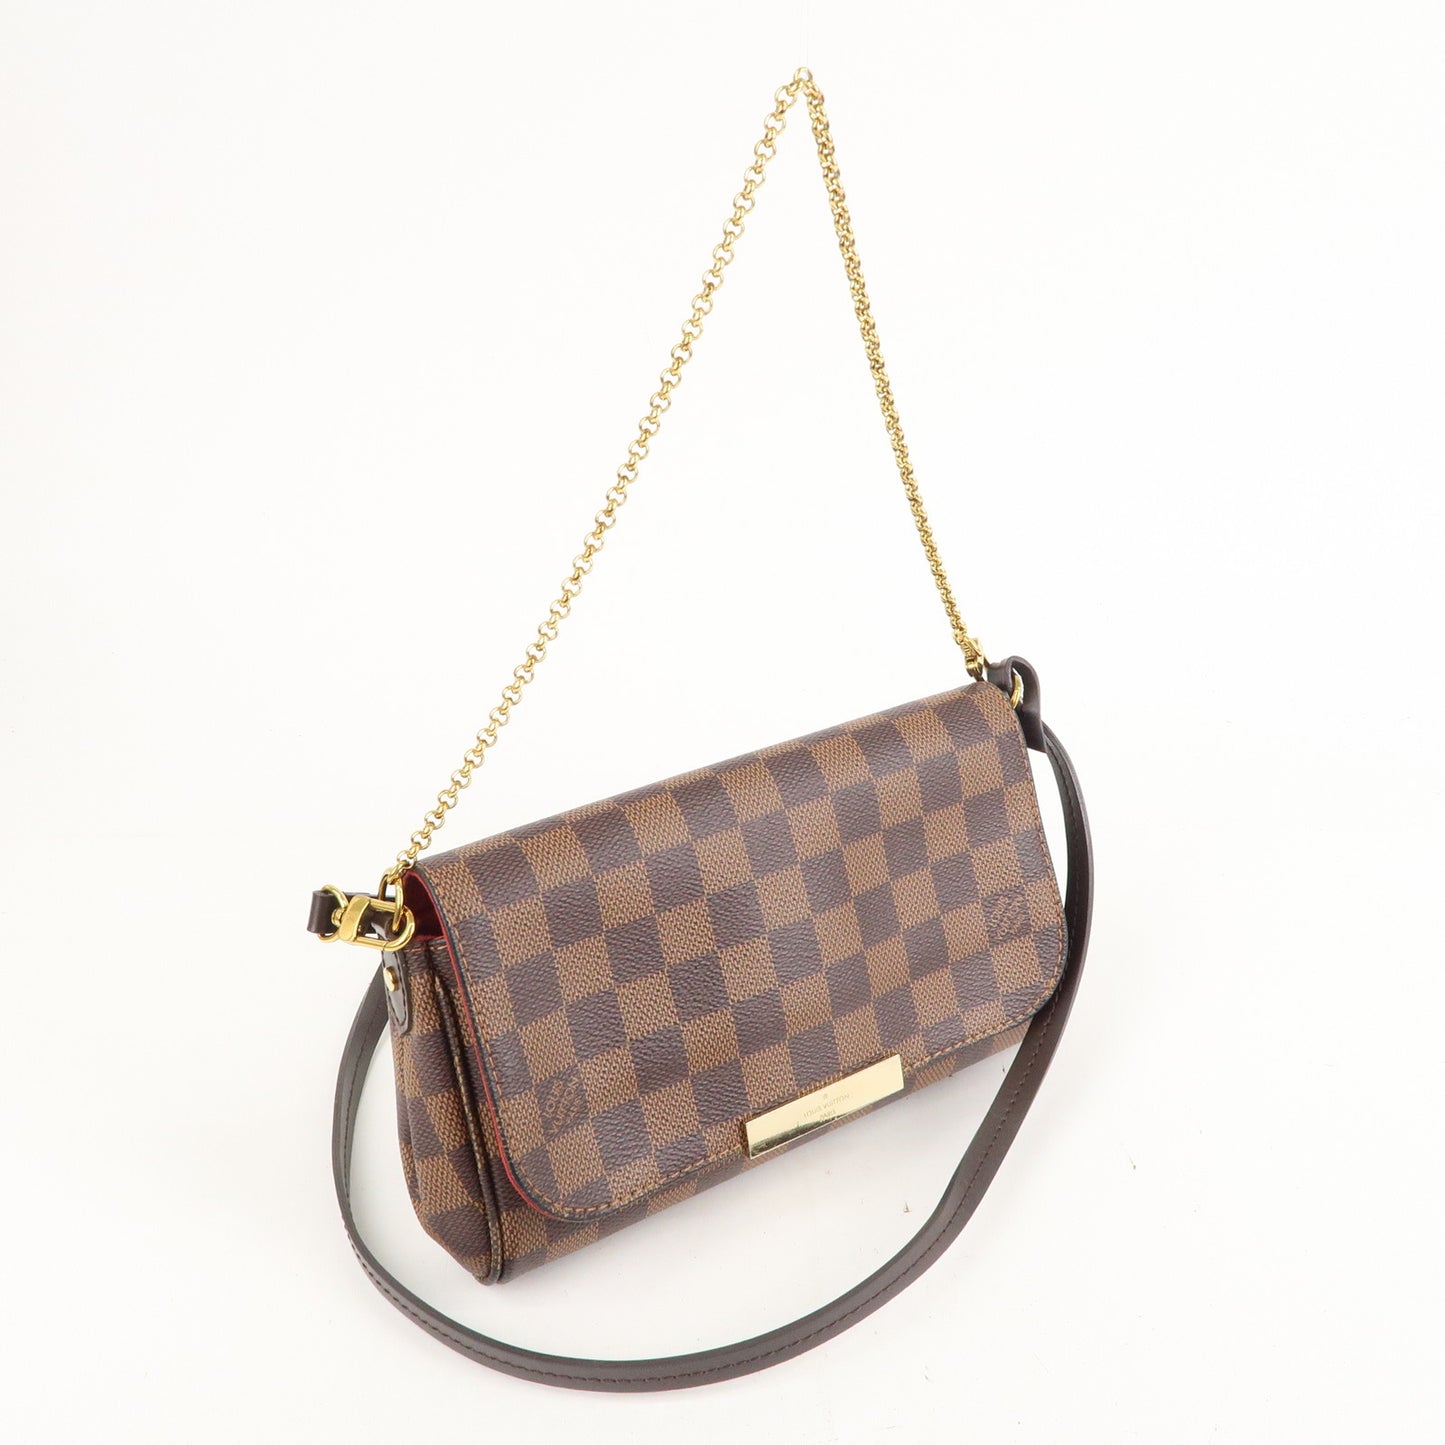 Louis Vuitton on X: A romantic gesture. Intensely feminine and